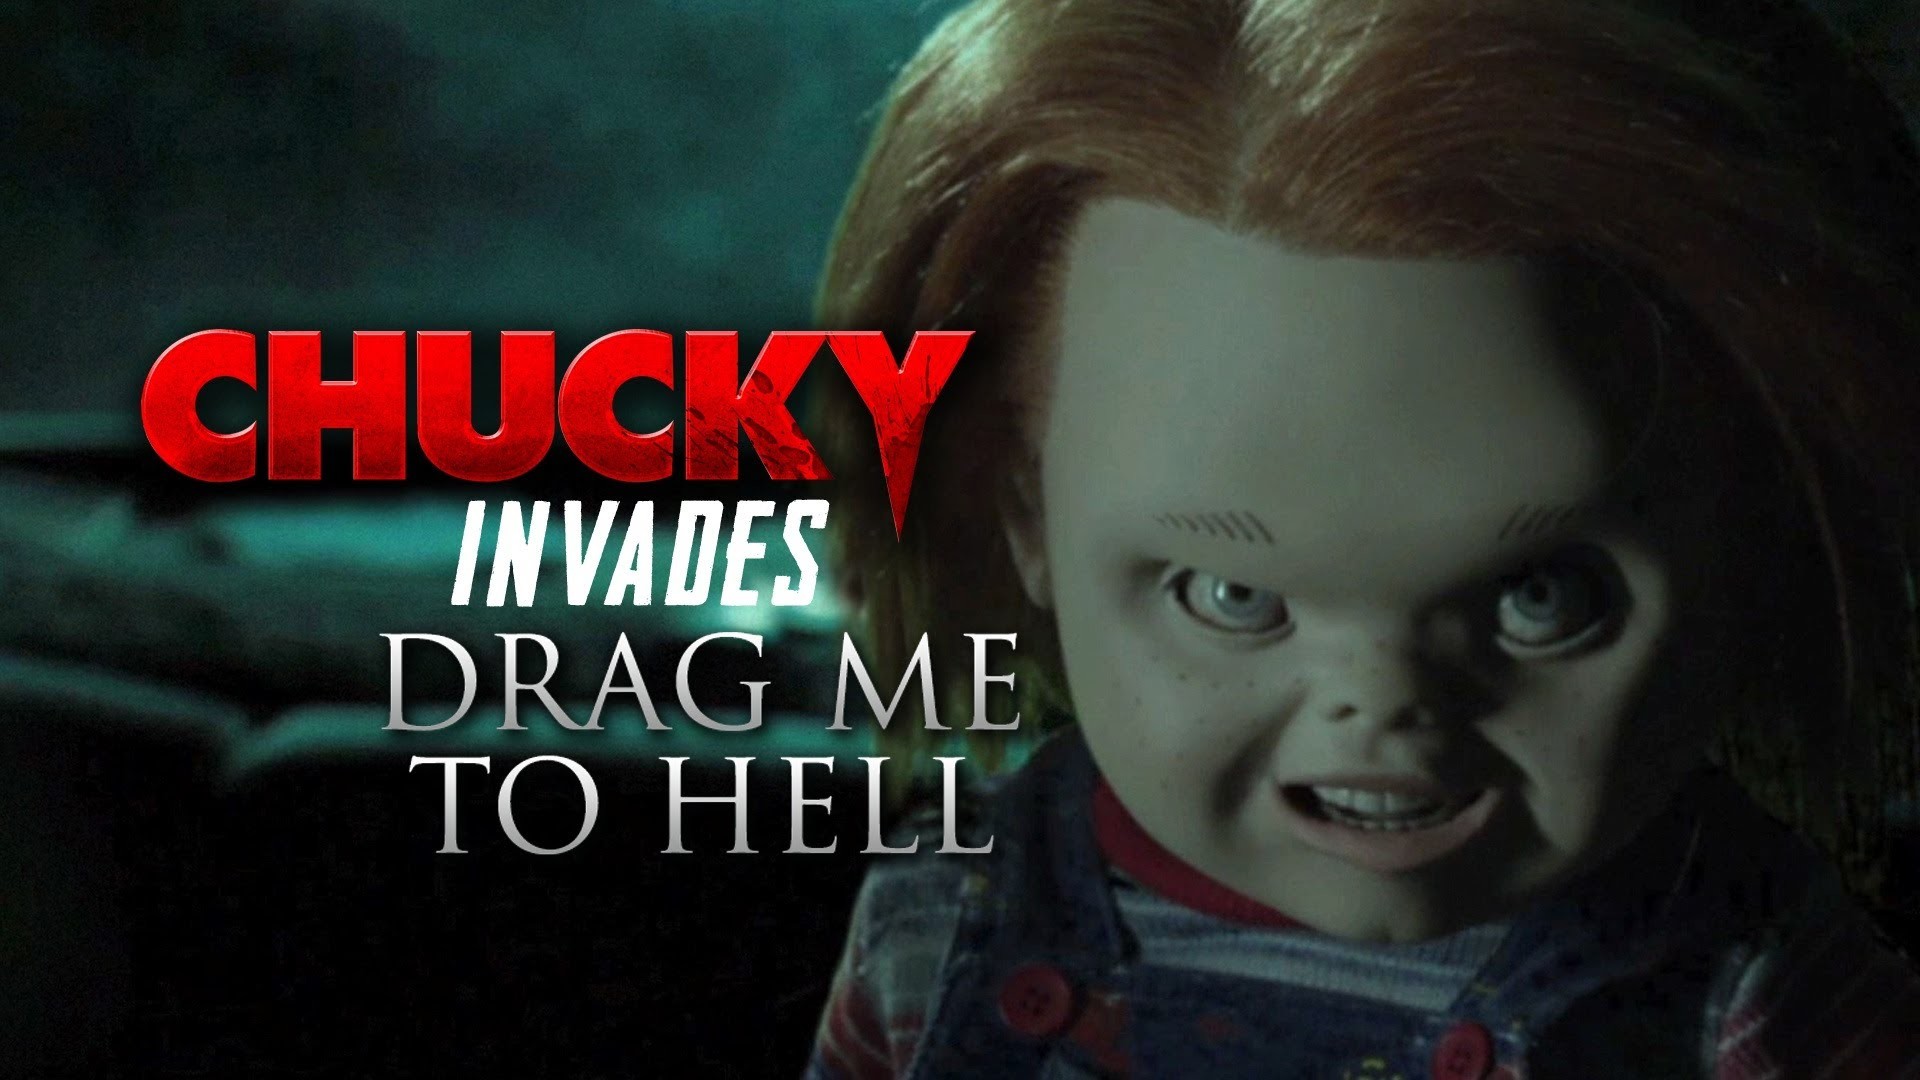 1920x1080 Chucky Invades Drag Me To Hell - Horror Movie MashUp (2013) Film HD -  YouTube